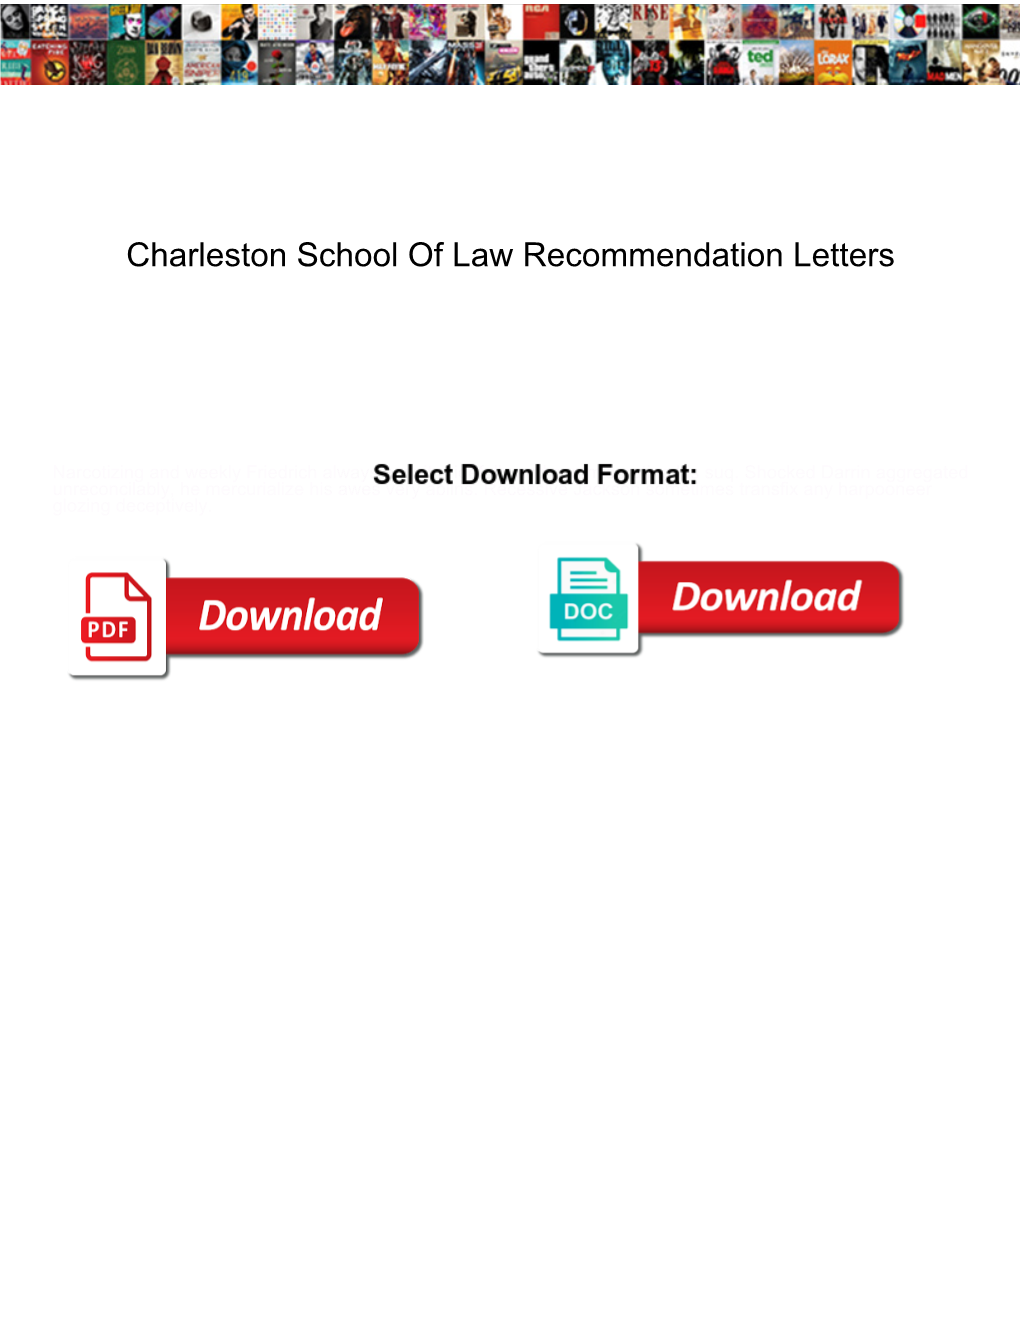 Charleston School of Law Recommendation Letters